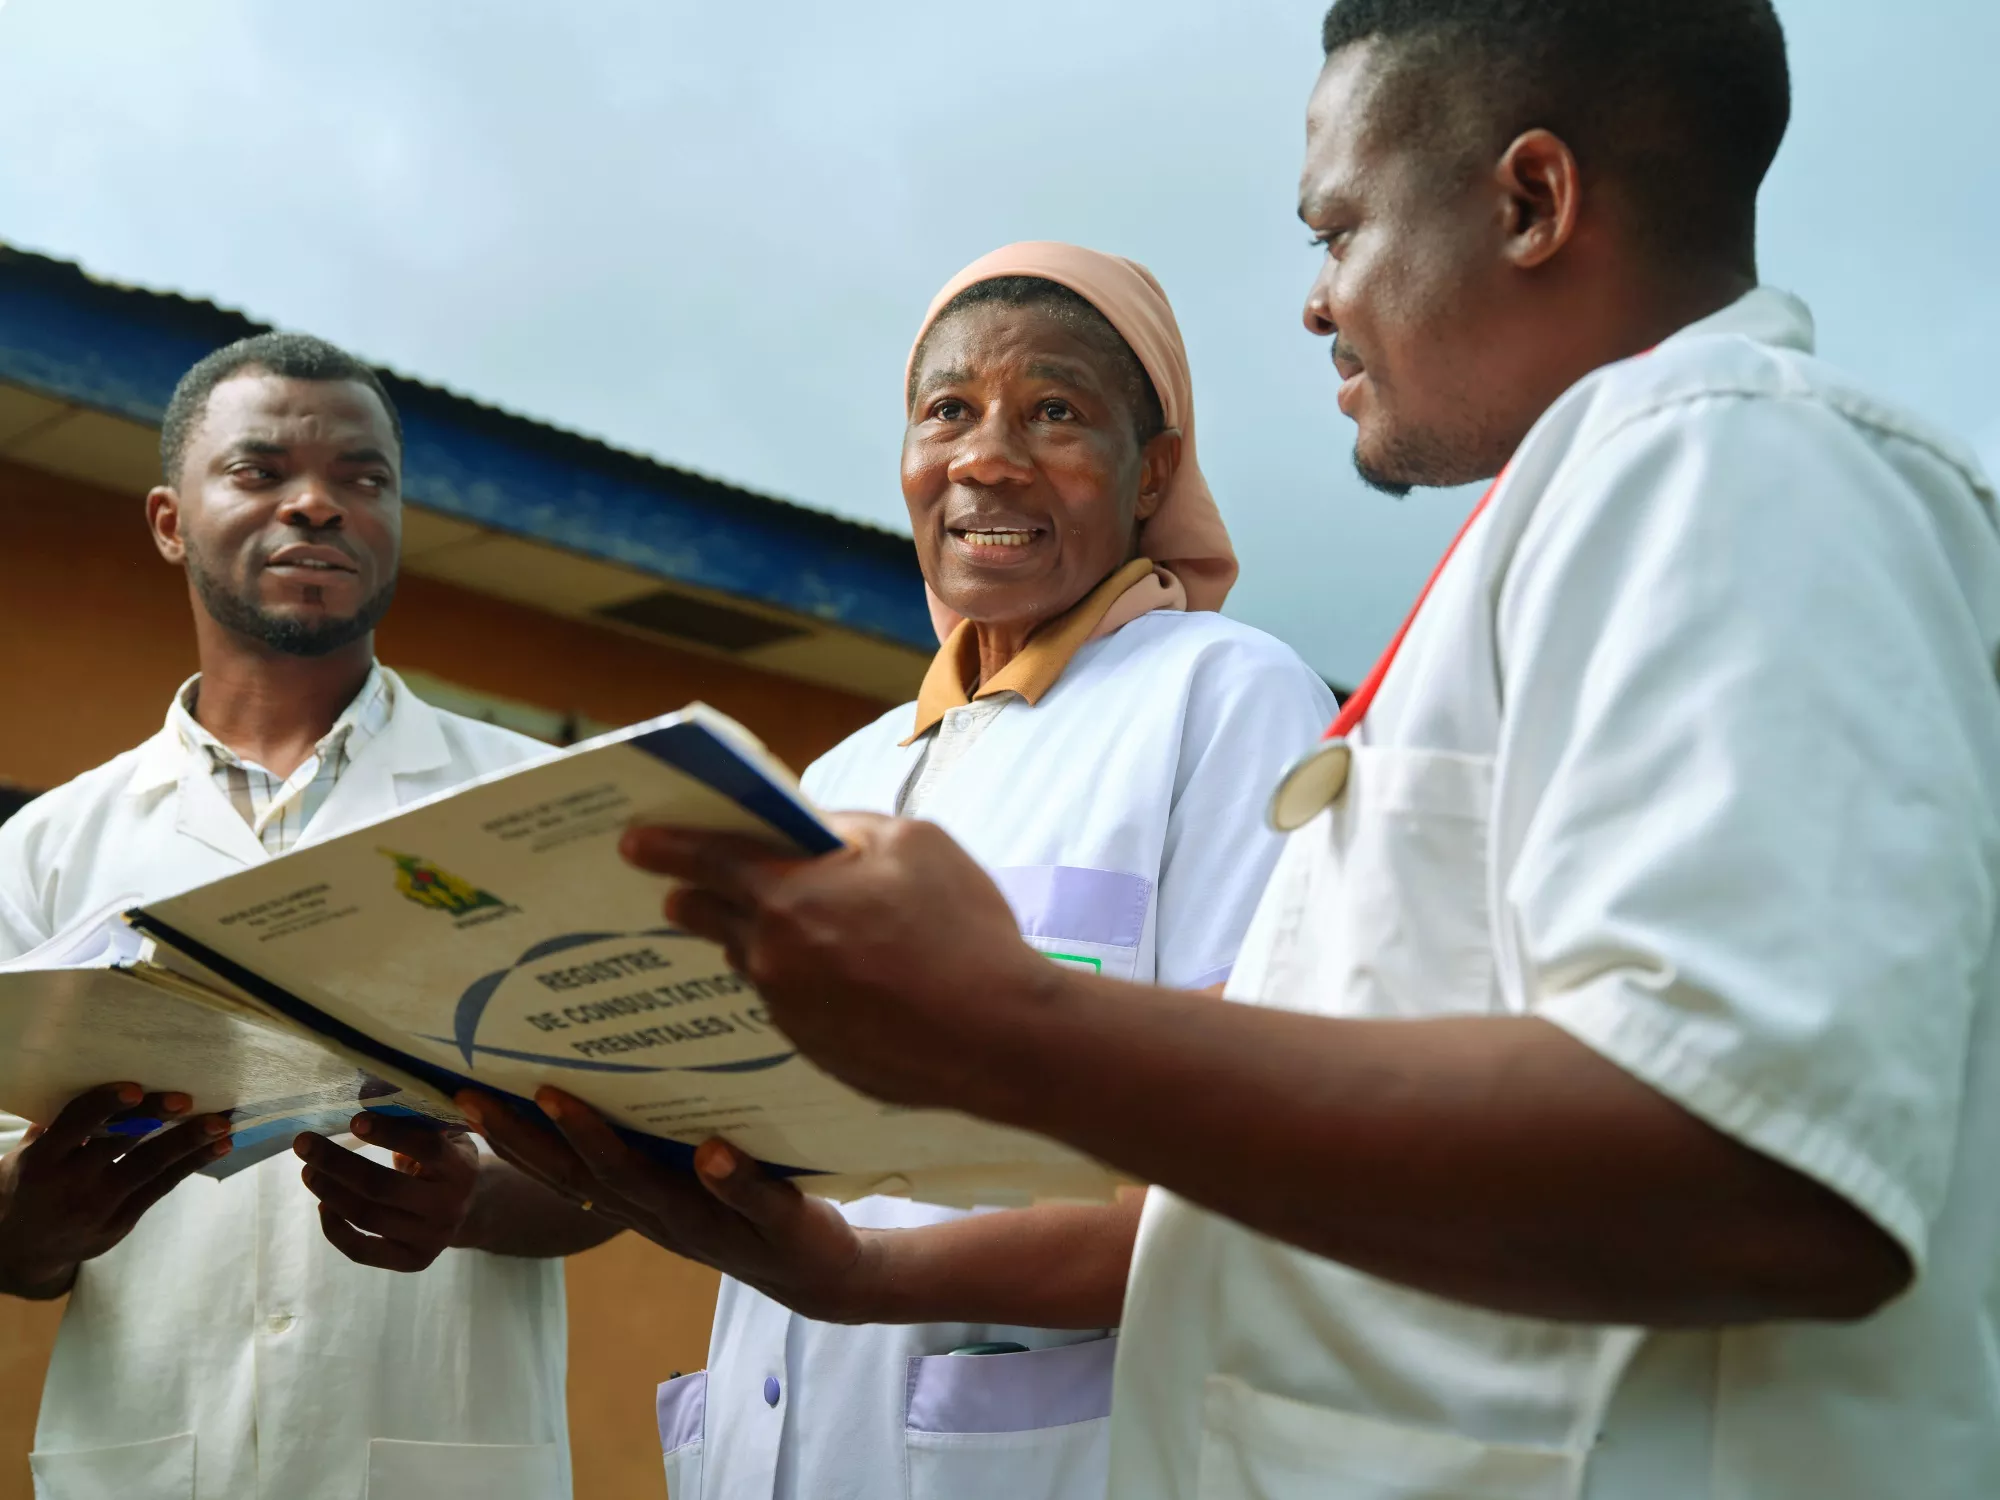 Sister Martine with nurses Thomas Ngue and Richard Bitomo at the Catholic mission’s health center in Ntui, in the Grand Mbam region of central Cameroon.